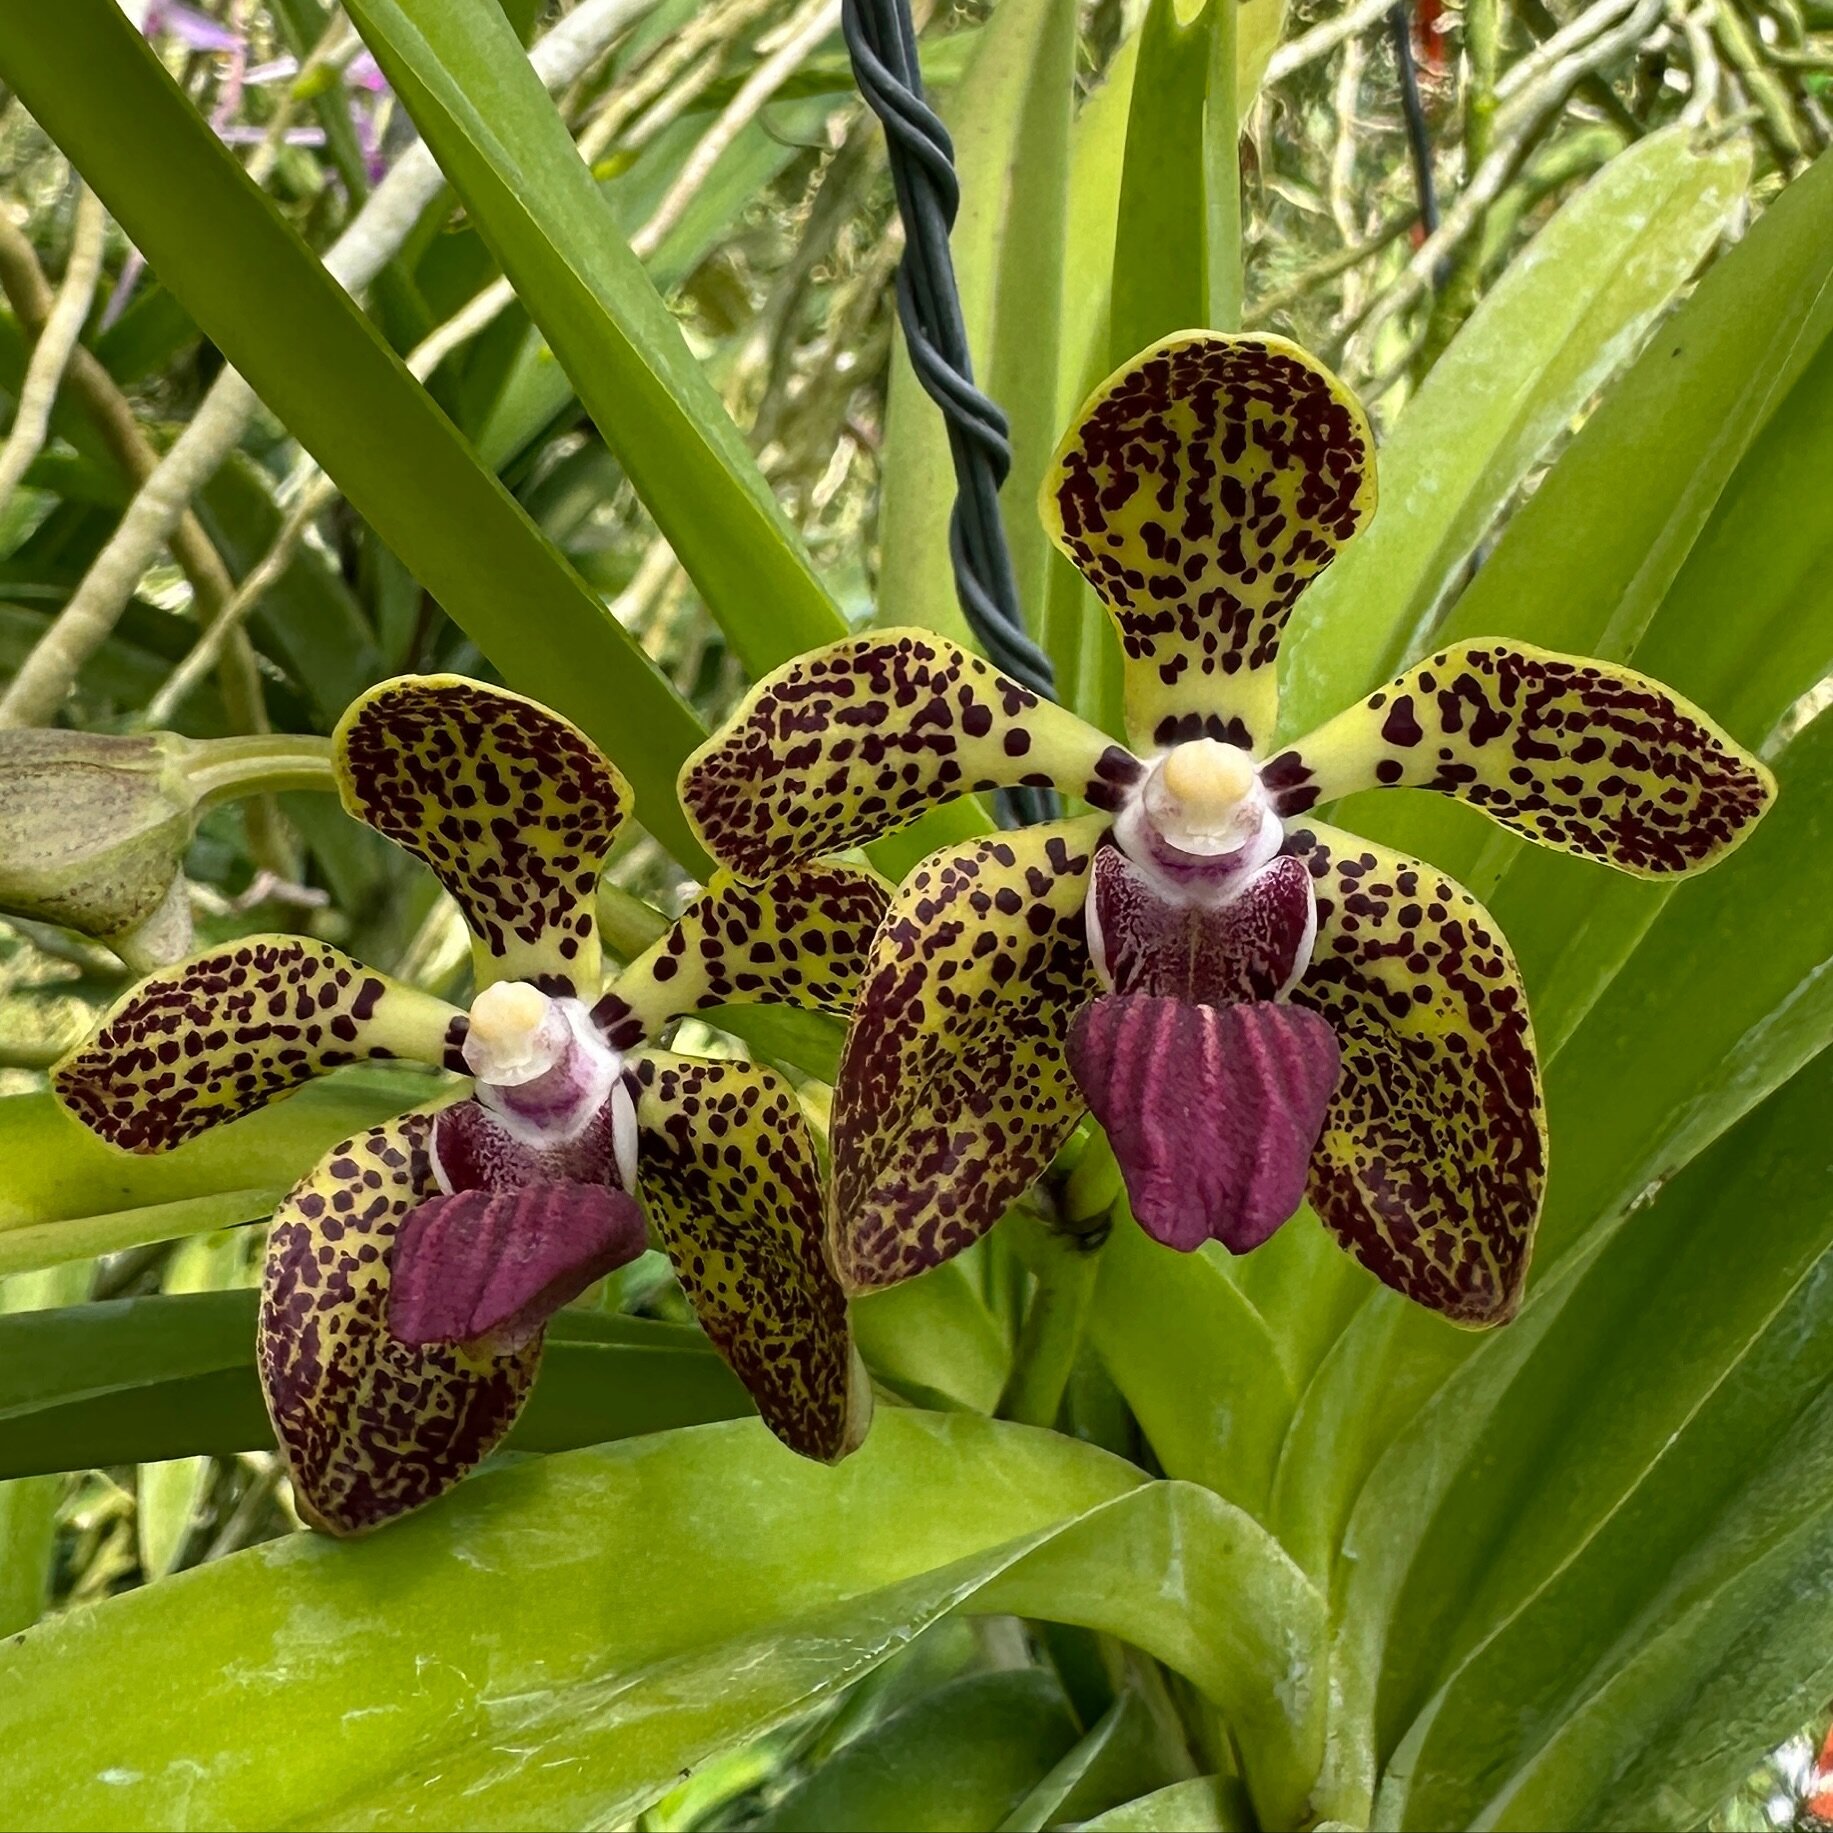 Pda. (Vanda) Amy G. Creekmur &lsquo;Purple Spots&rsquo; x Vanda cristata (2906), gorgeous super compact bloomer. Fragrant. Available now. 

Want to help us grow? Click &ldquo;follow&rdquo; then share the posts that make you go wow! Thanks!

.
.
.
.
#